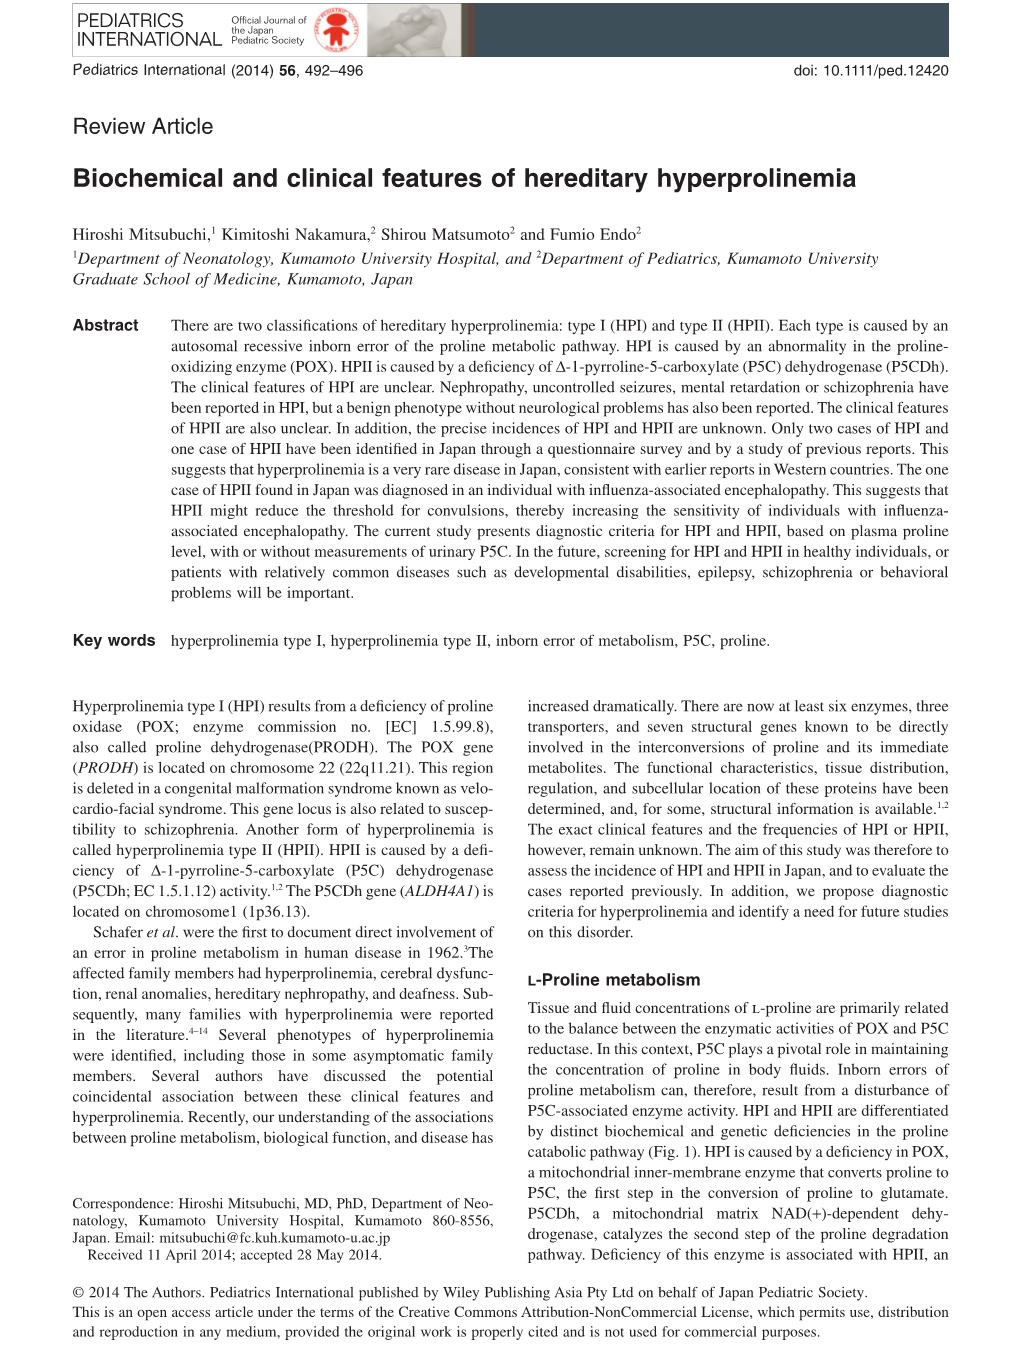 Biochemical and Clinical Features of Hereditary Hyperprolinemia